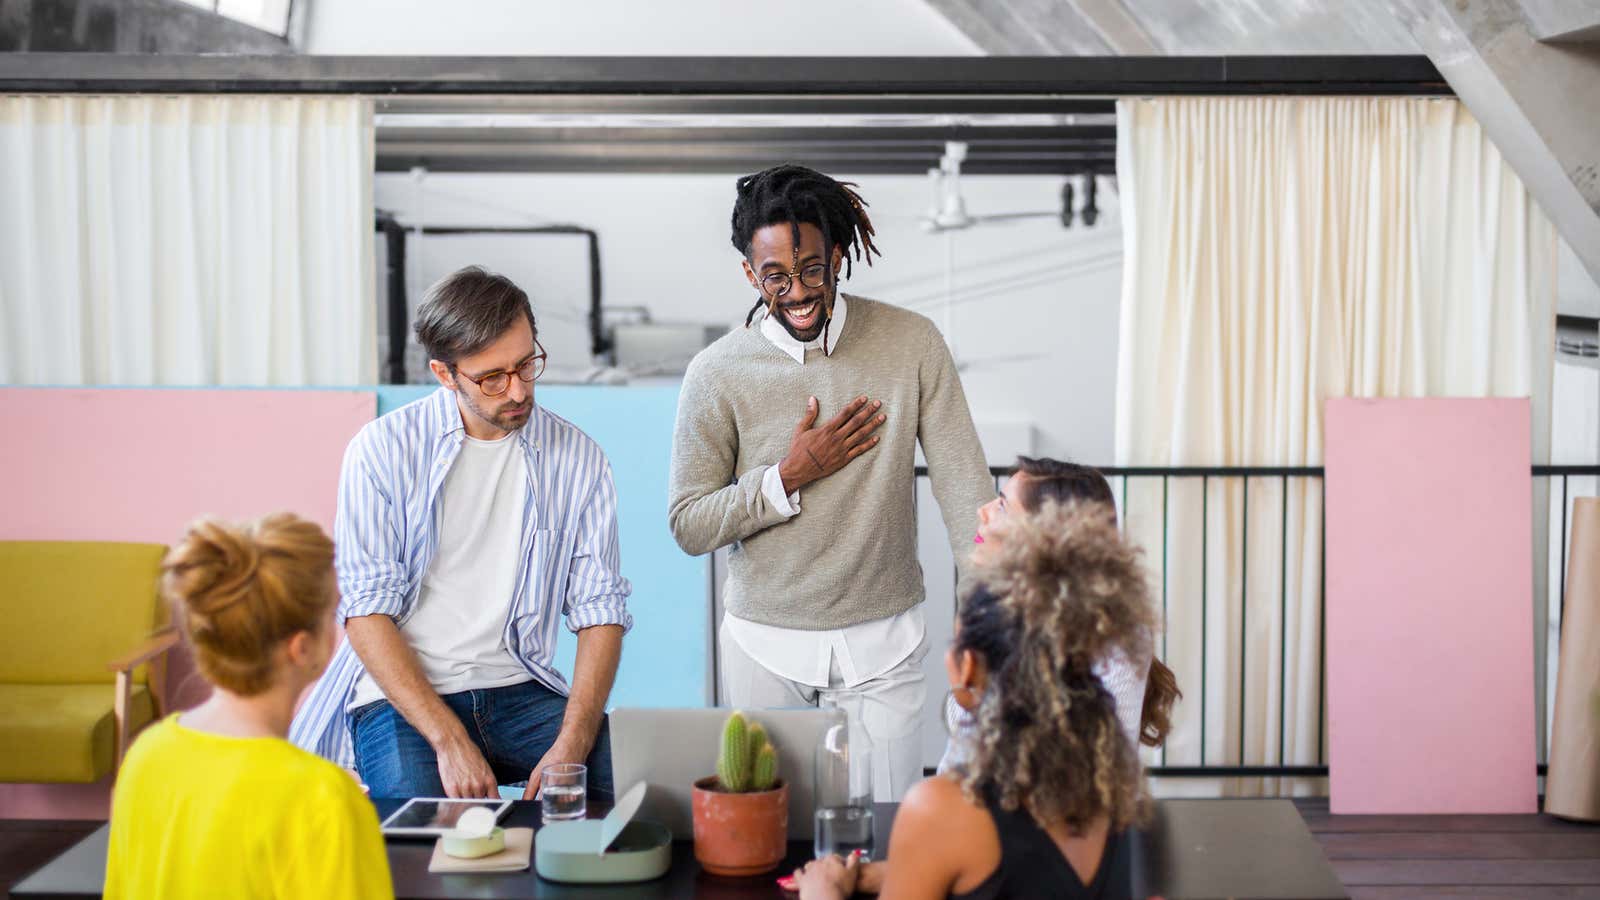 An interview with a Salesforce HR vet reveals the critical connection between individual employee engagement and company-wide reskilling initiatives.